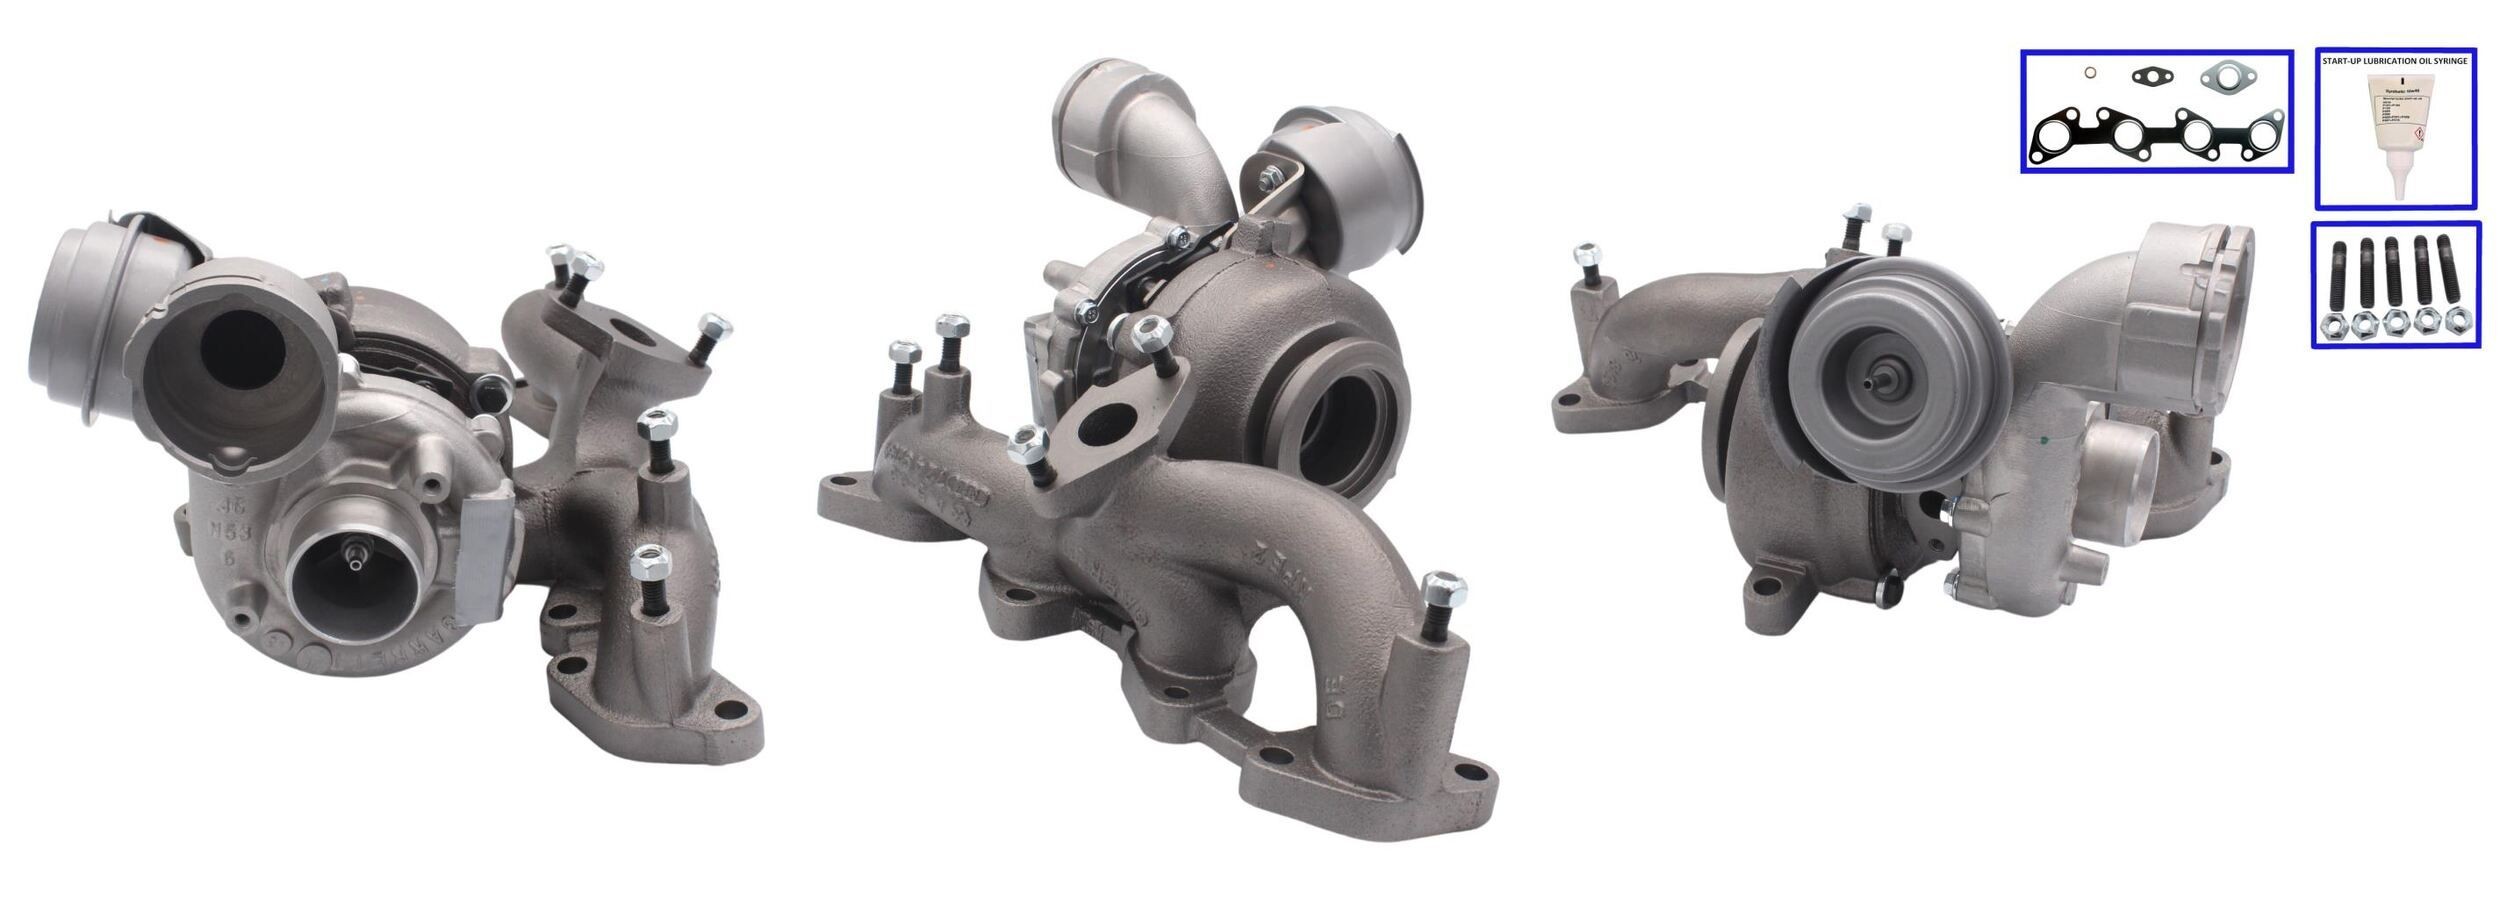 Seat Turbocharger LUCAS LTRPA7249302 at a good price